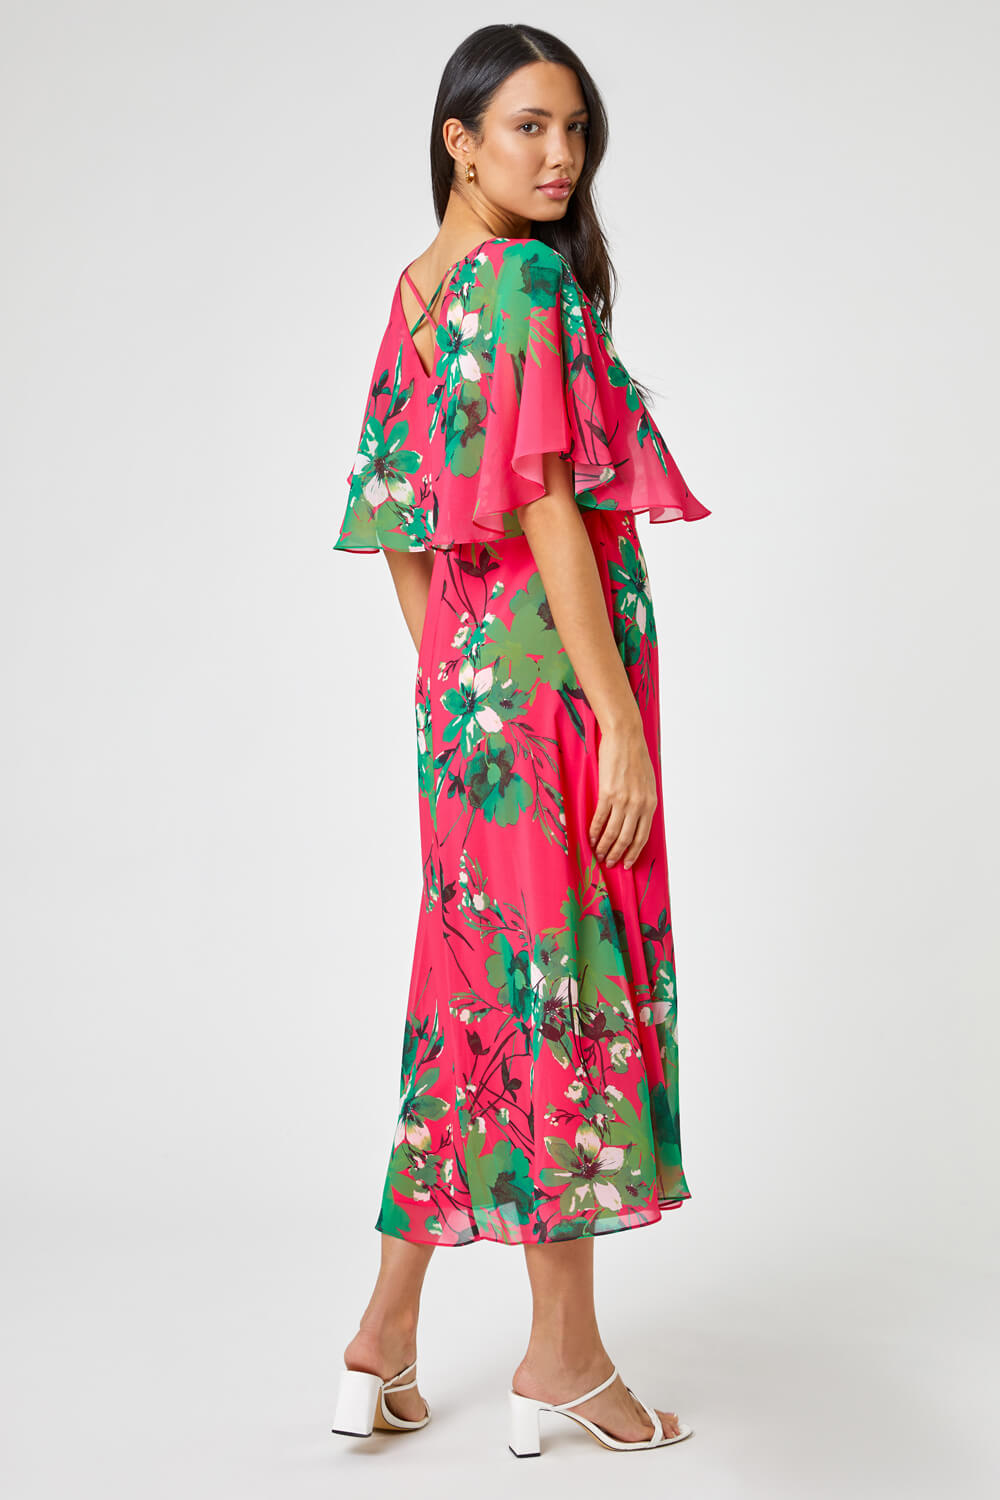 PINK Floral Print Frill Cape Wrap Dress, Image 2 of 5